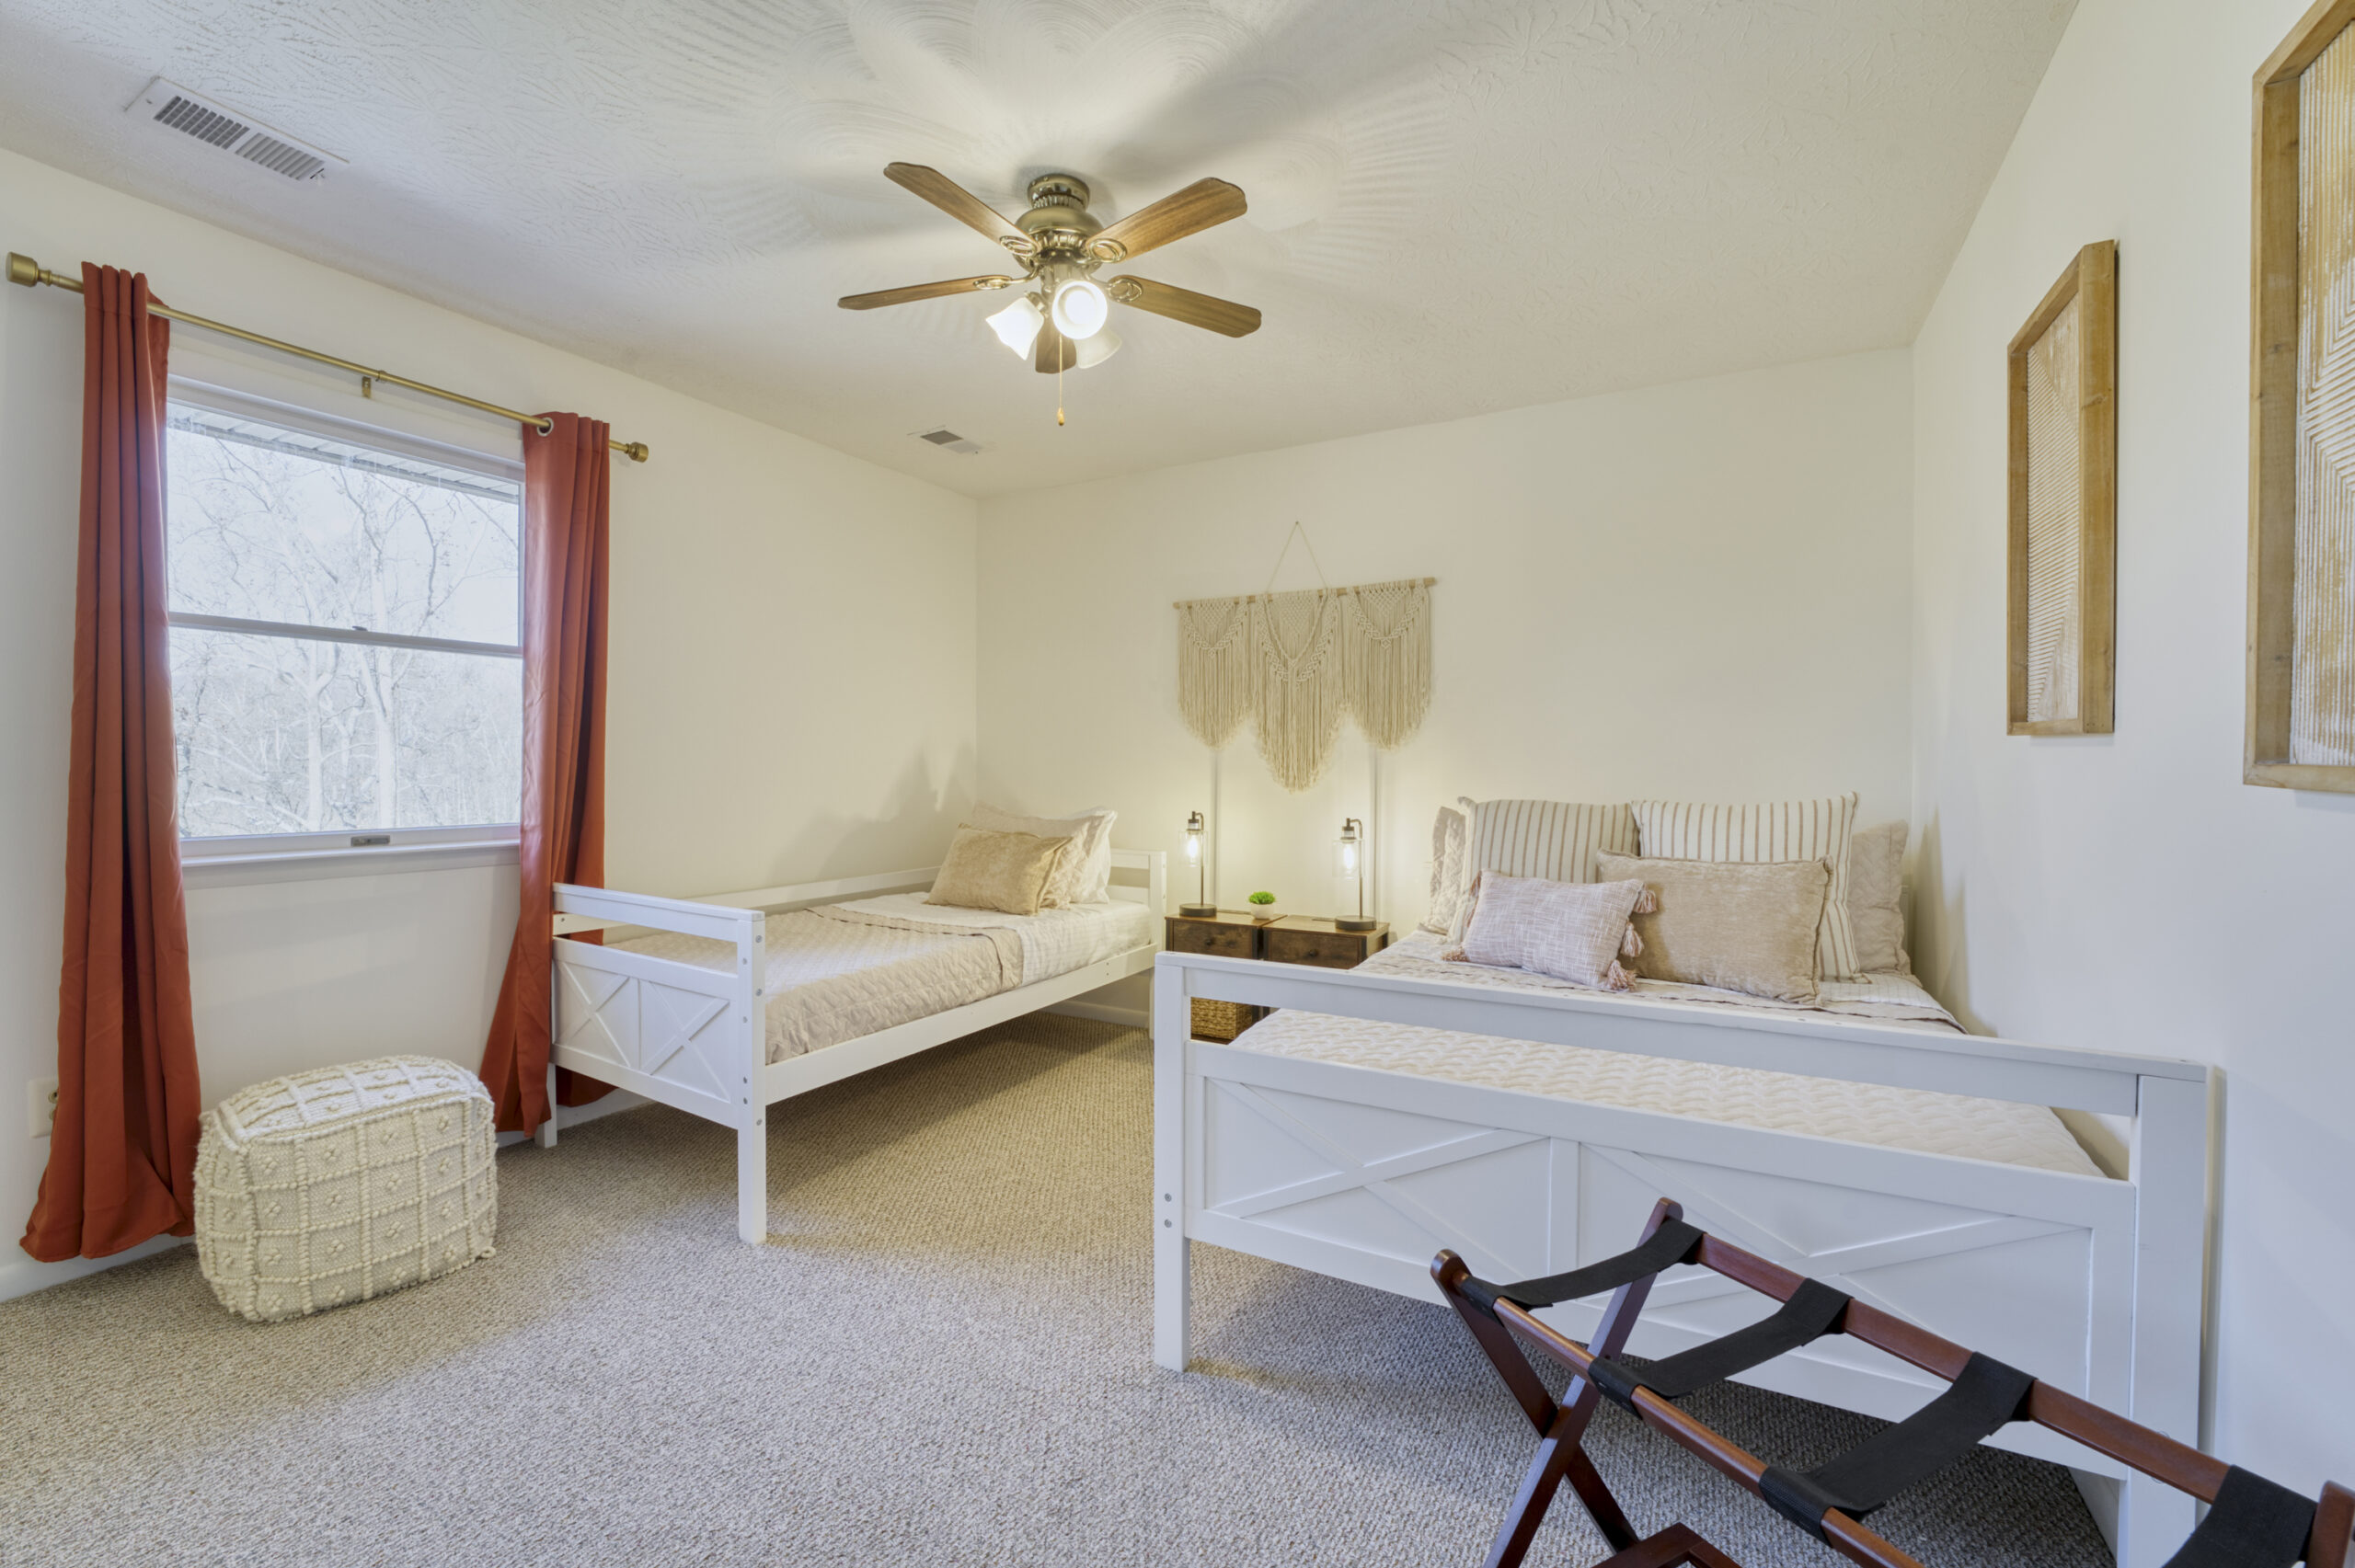 Professional interior photo of 4809 Grove Hill River Rd - showing one of the bedrooms with ceiling fan, double bed and single bed